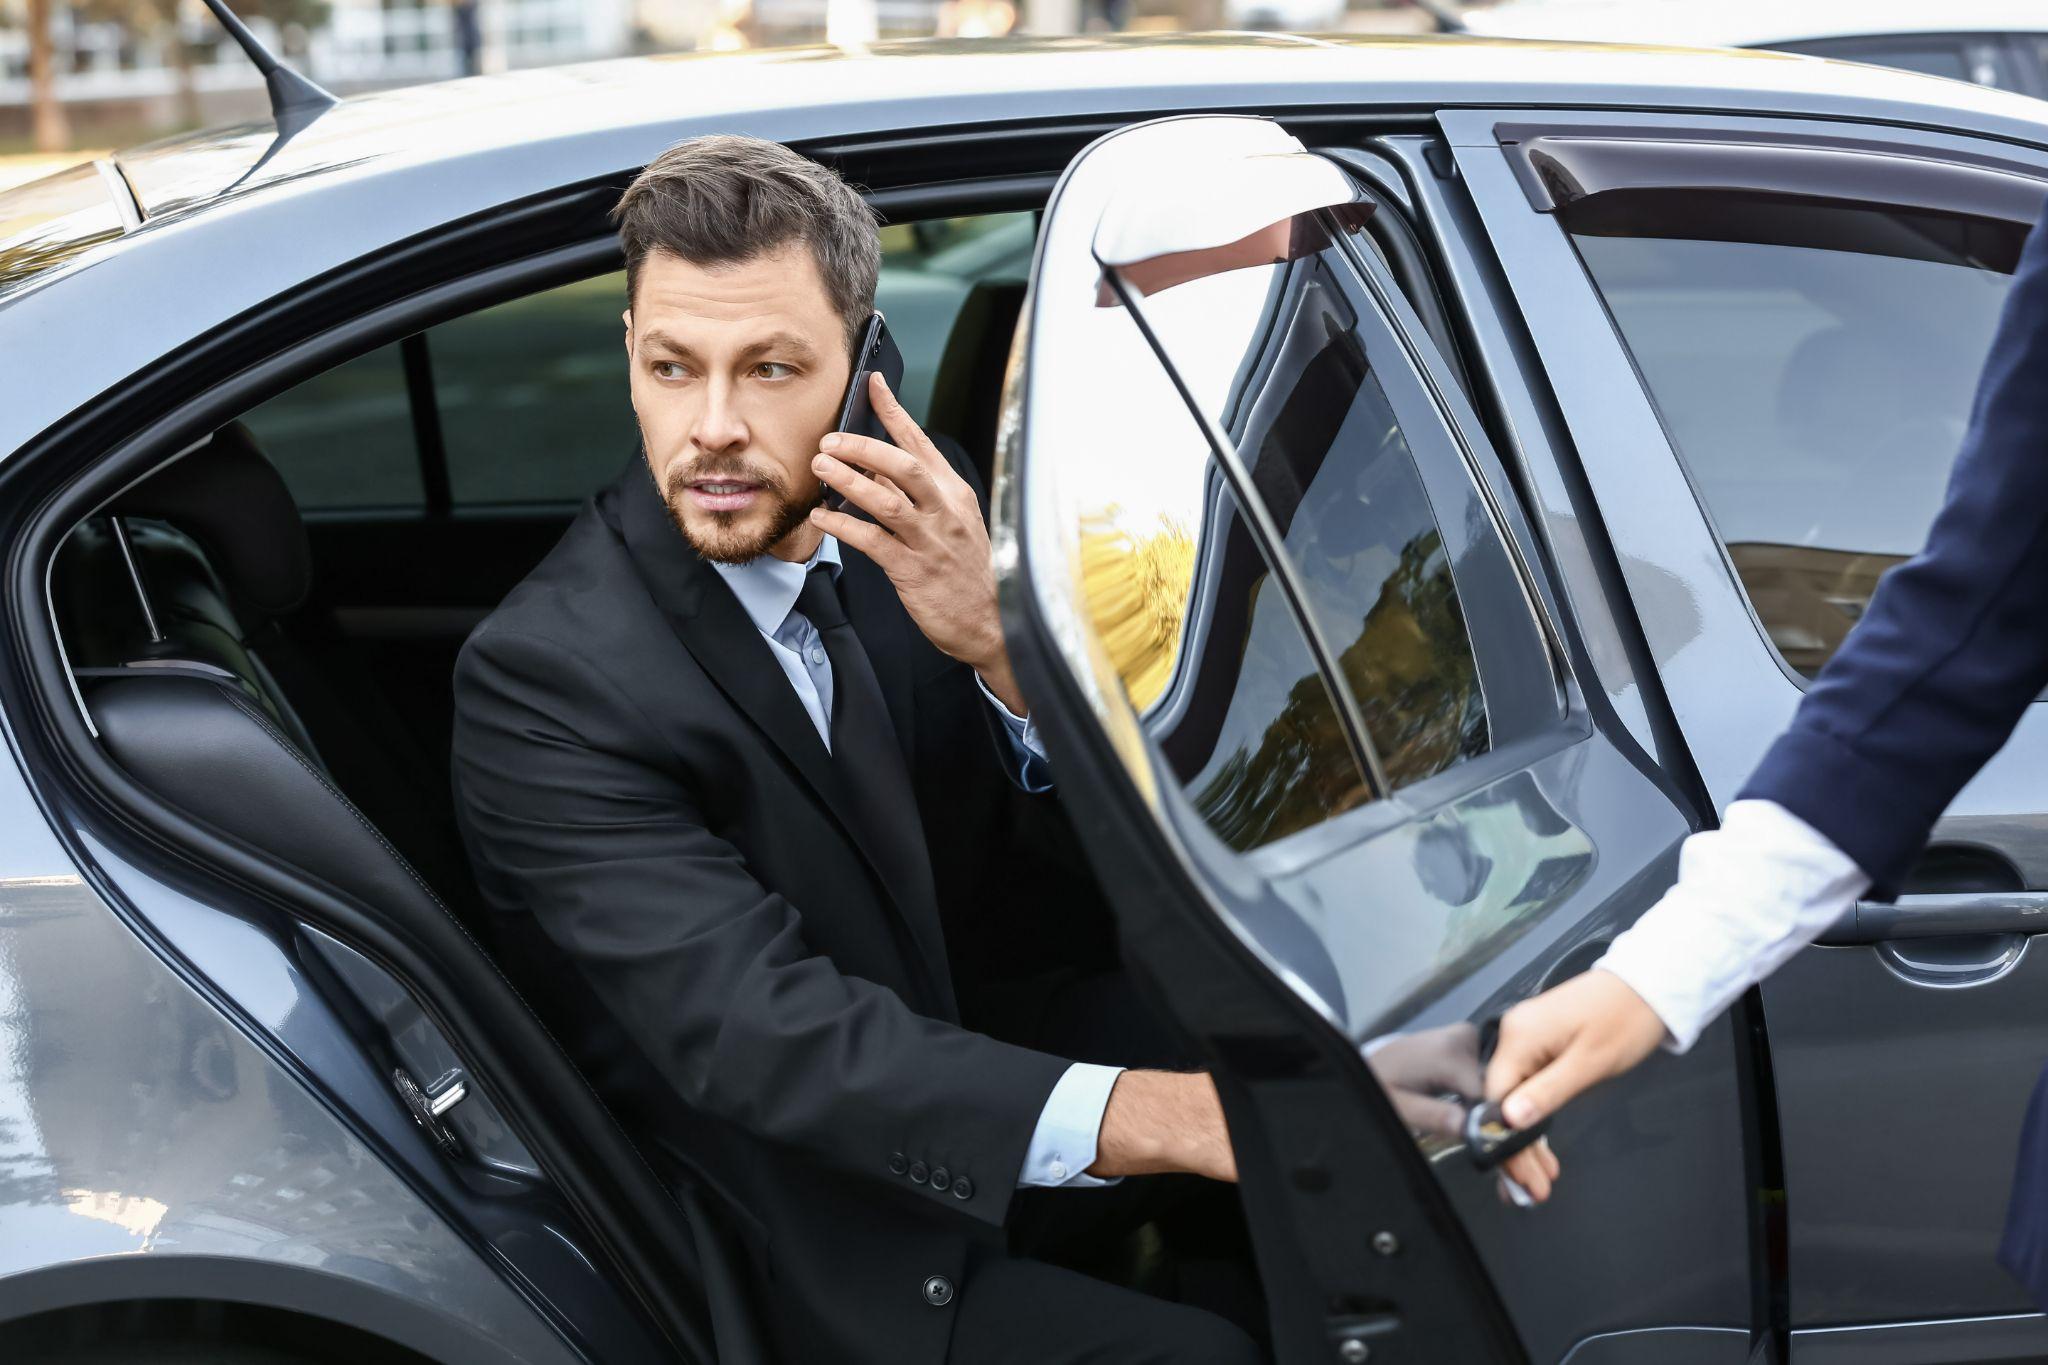 Executive Chauffeur Services for Discerning Professionals